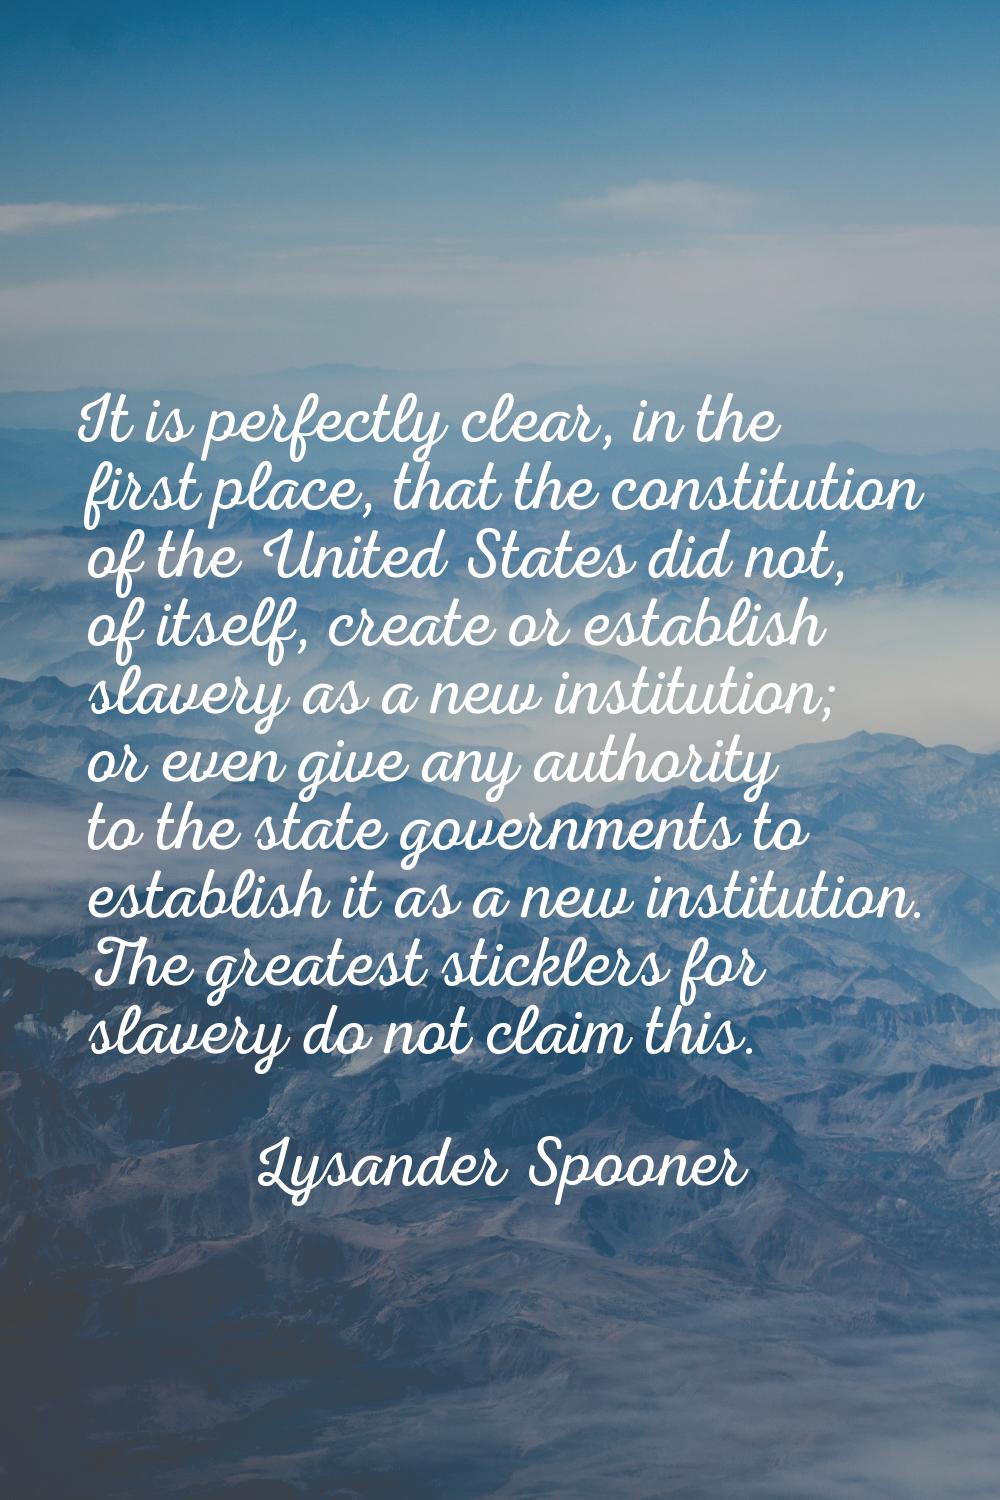 It is perfectly clear, in the first place, that the constitution of the United States did not, of i